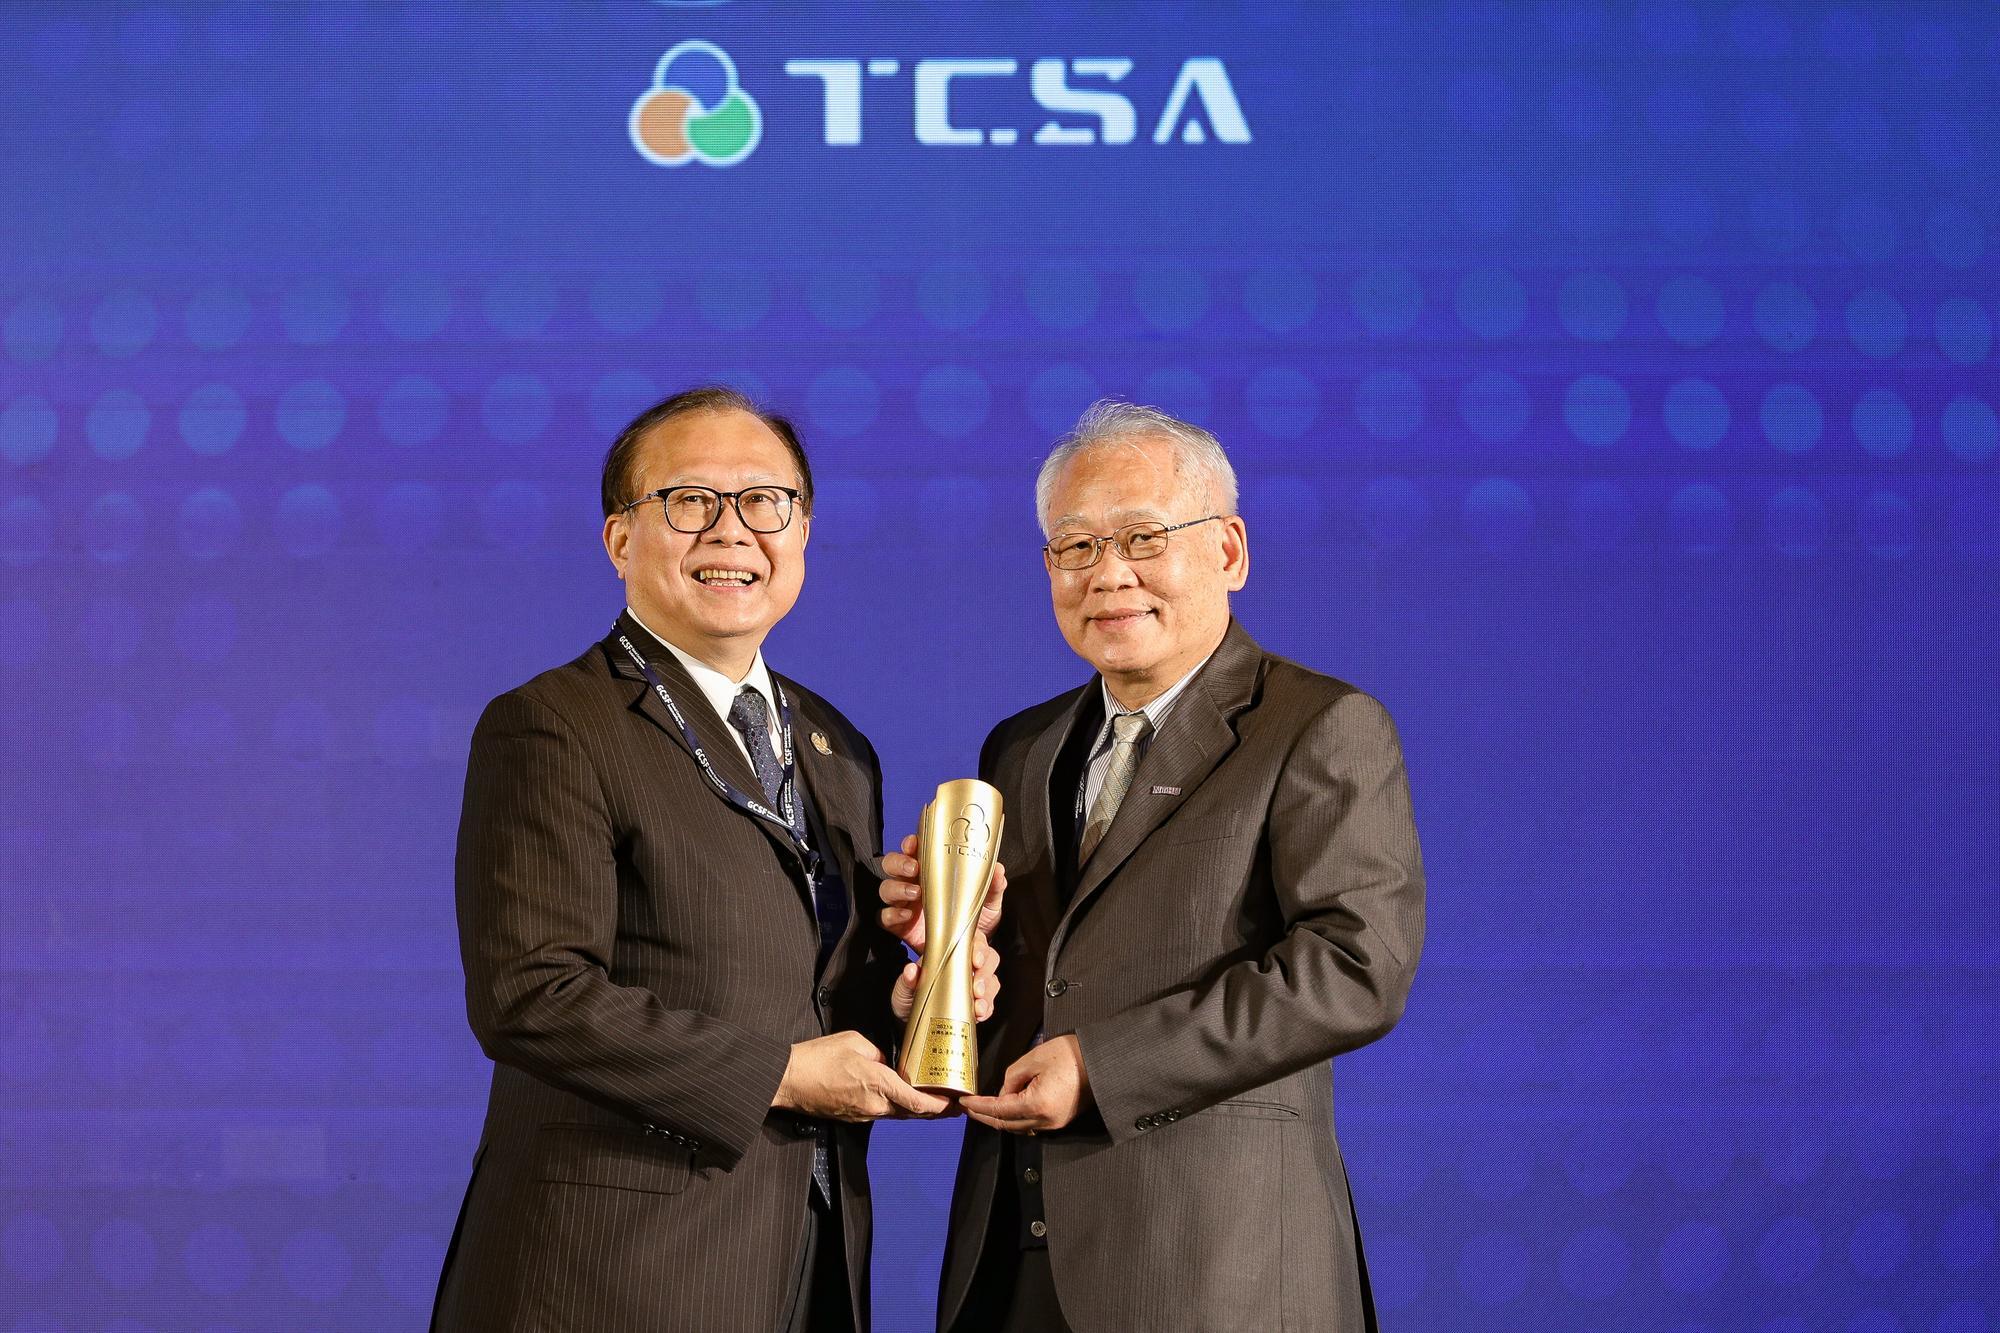 NTHU received the Taiwan University Sustainability Award for the third consecutive time. Senior Vice President Nyan-Hwa Tai (戴念華) (right), also the Chief Sustainability Officer, accepted the award on behalf of NTHU from Minister Chun-Jung Su (蘇俊榮) of the Directorate-General of Personnel Administration, Executive Yuan.